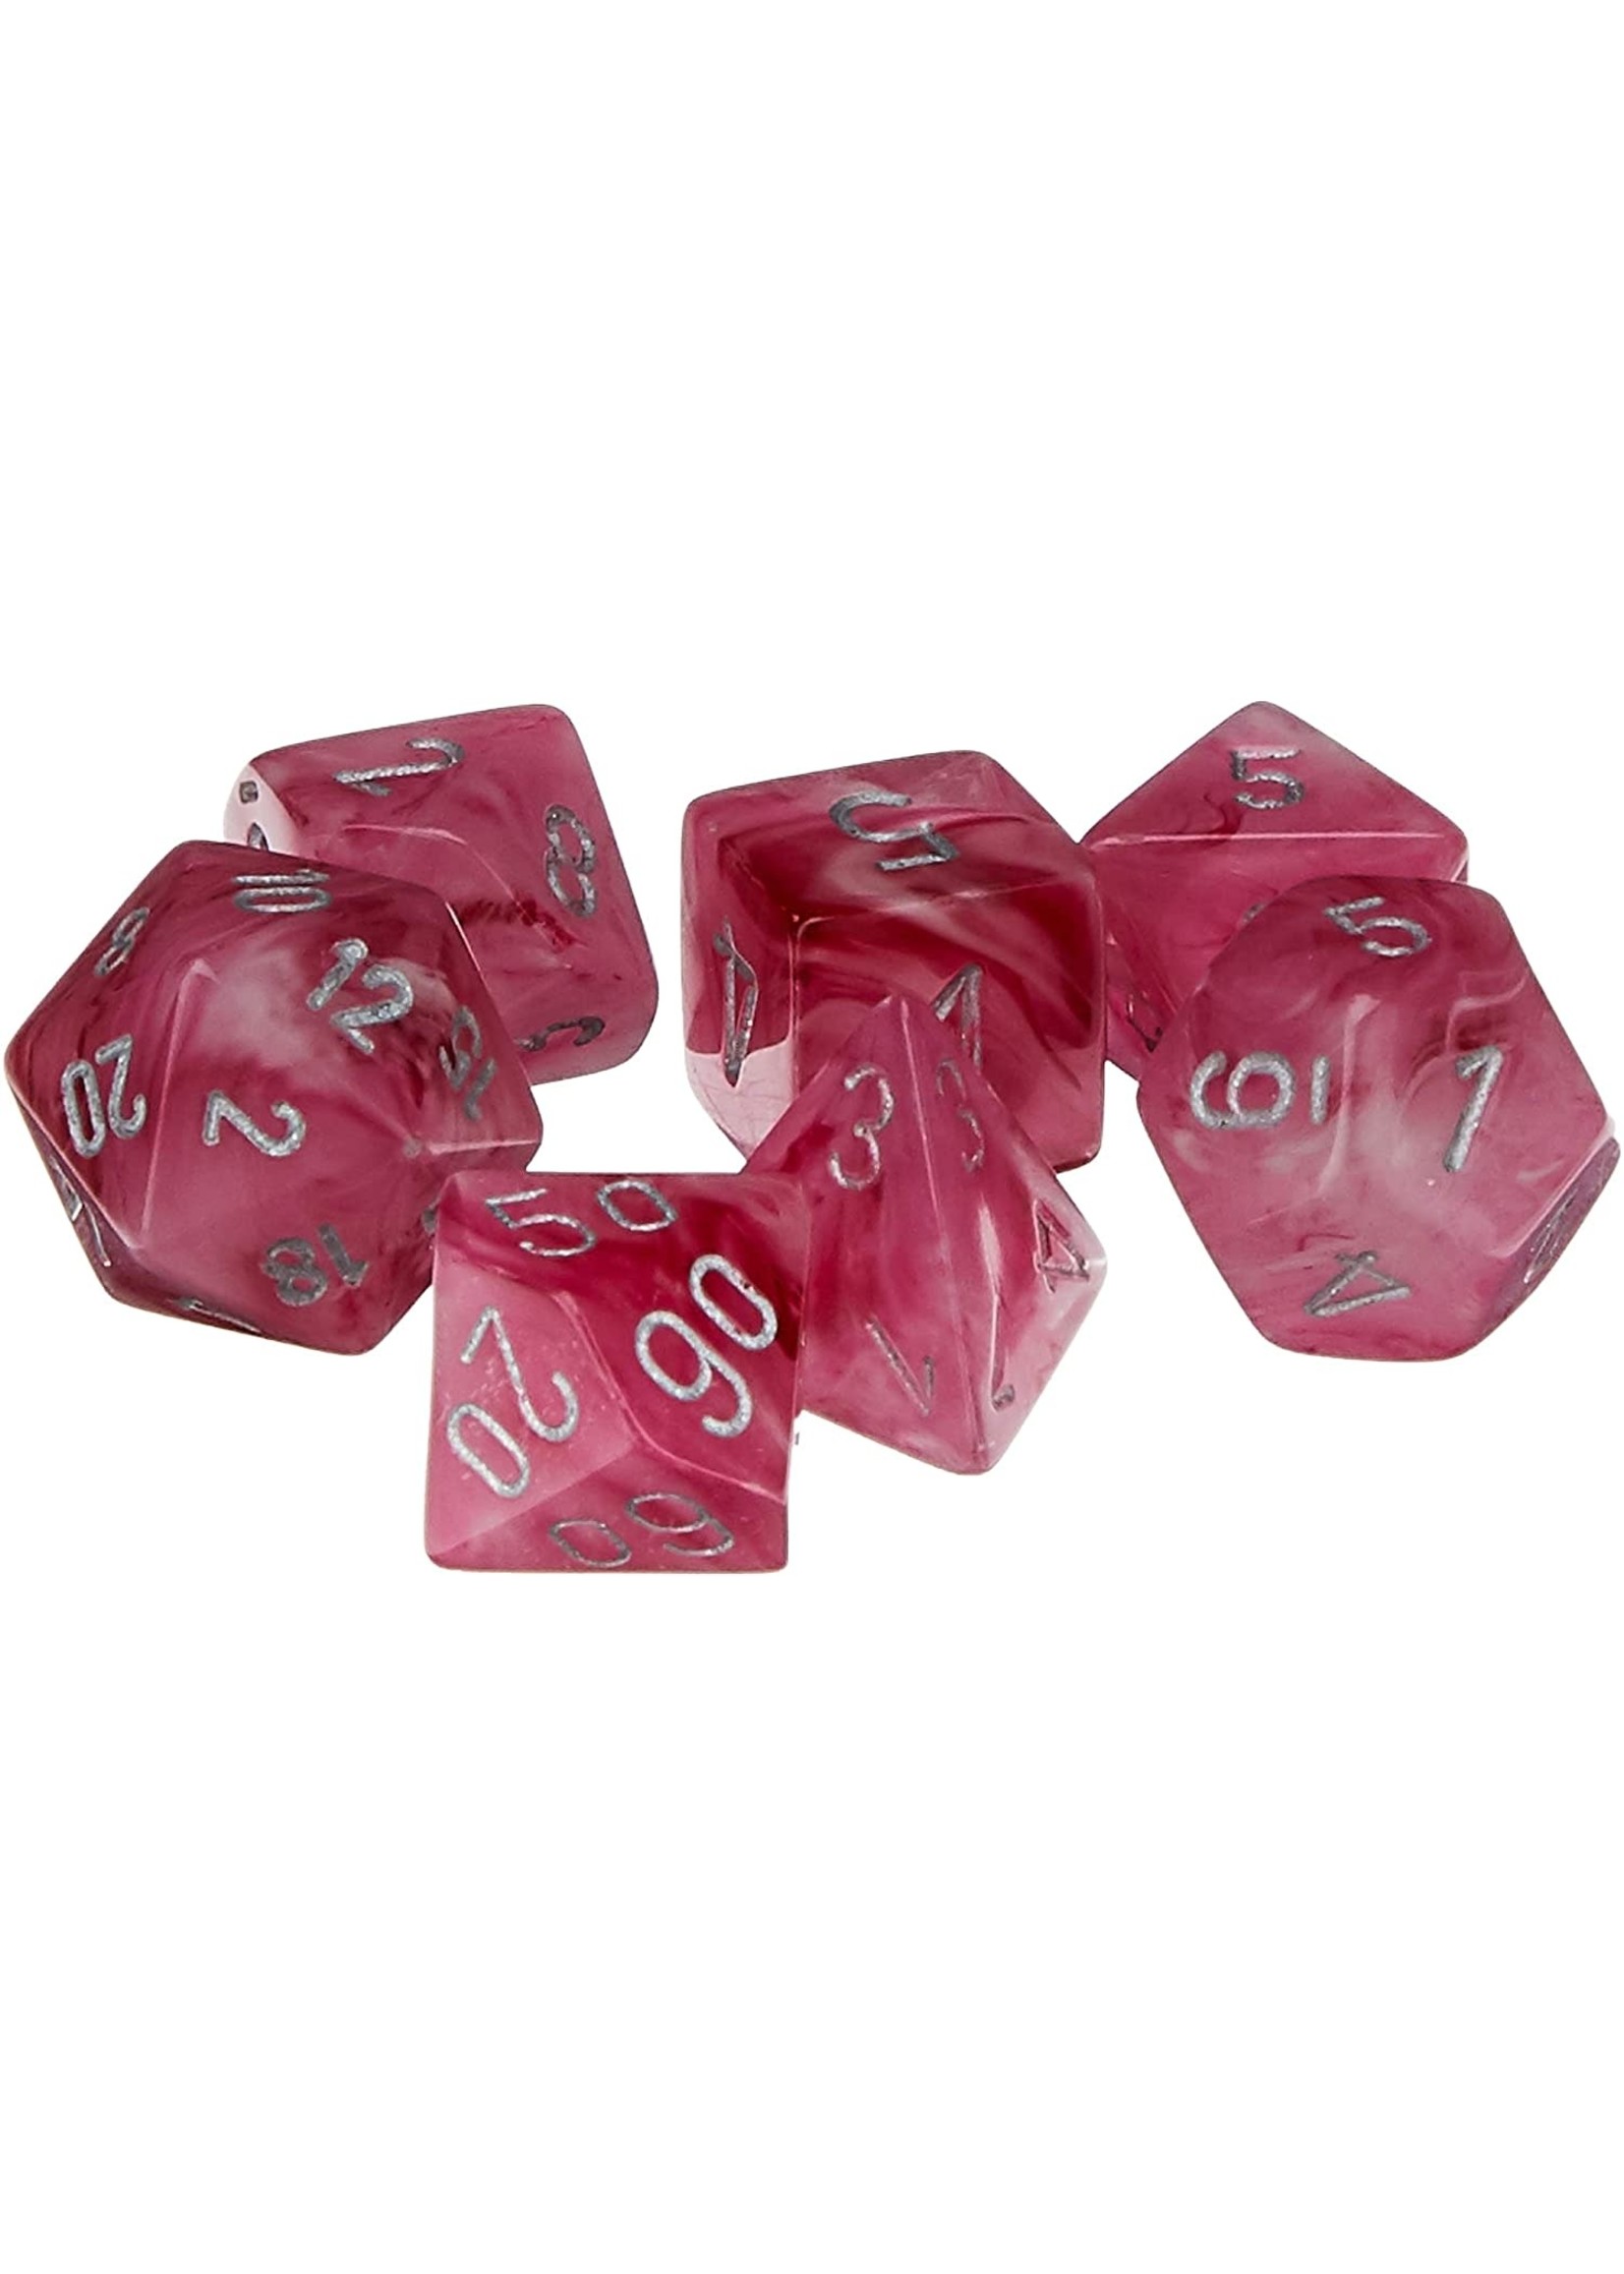 Chessex Ghostly Glow Poly 7 set: Pink w/ Silver